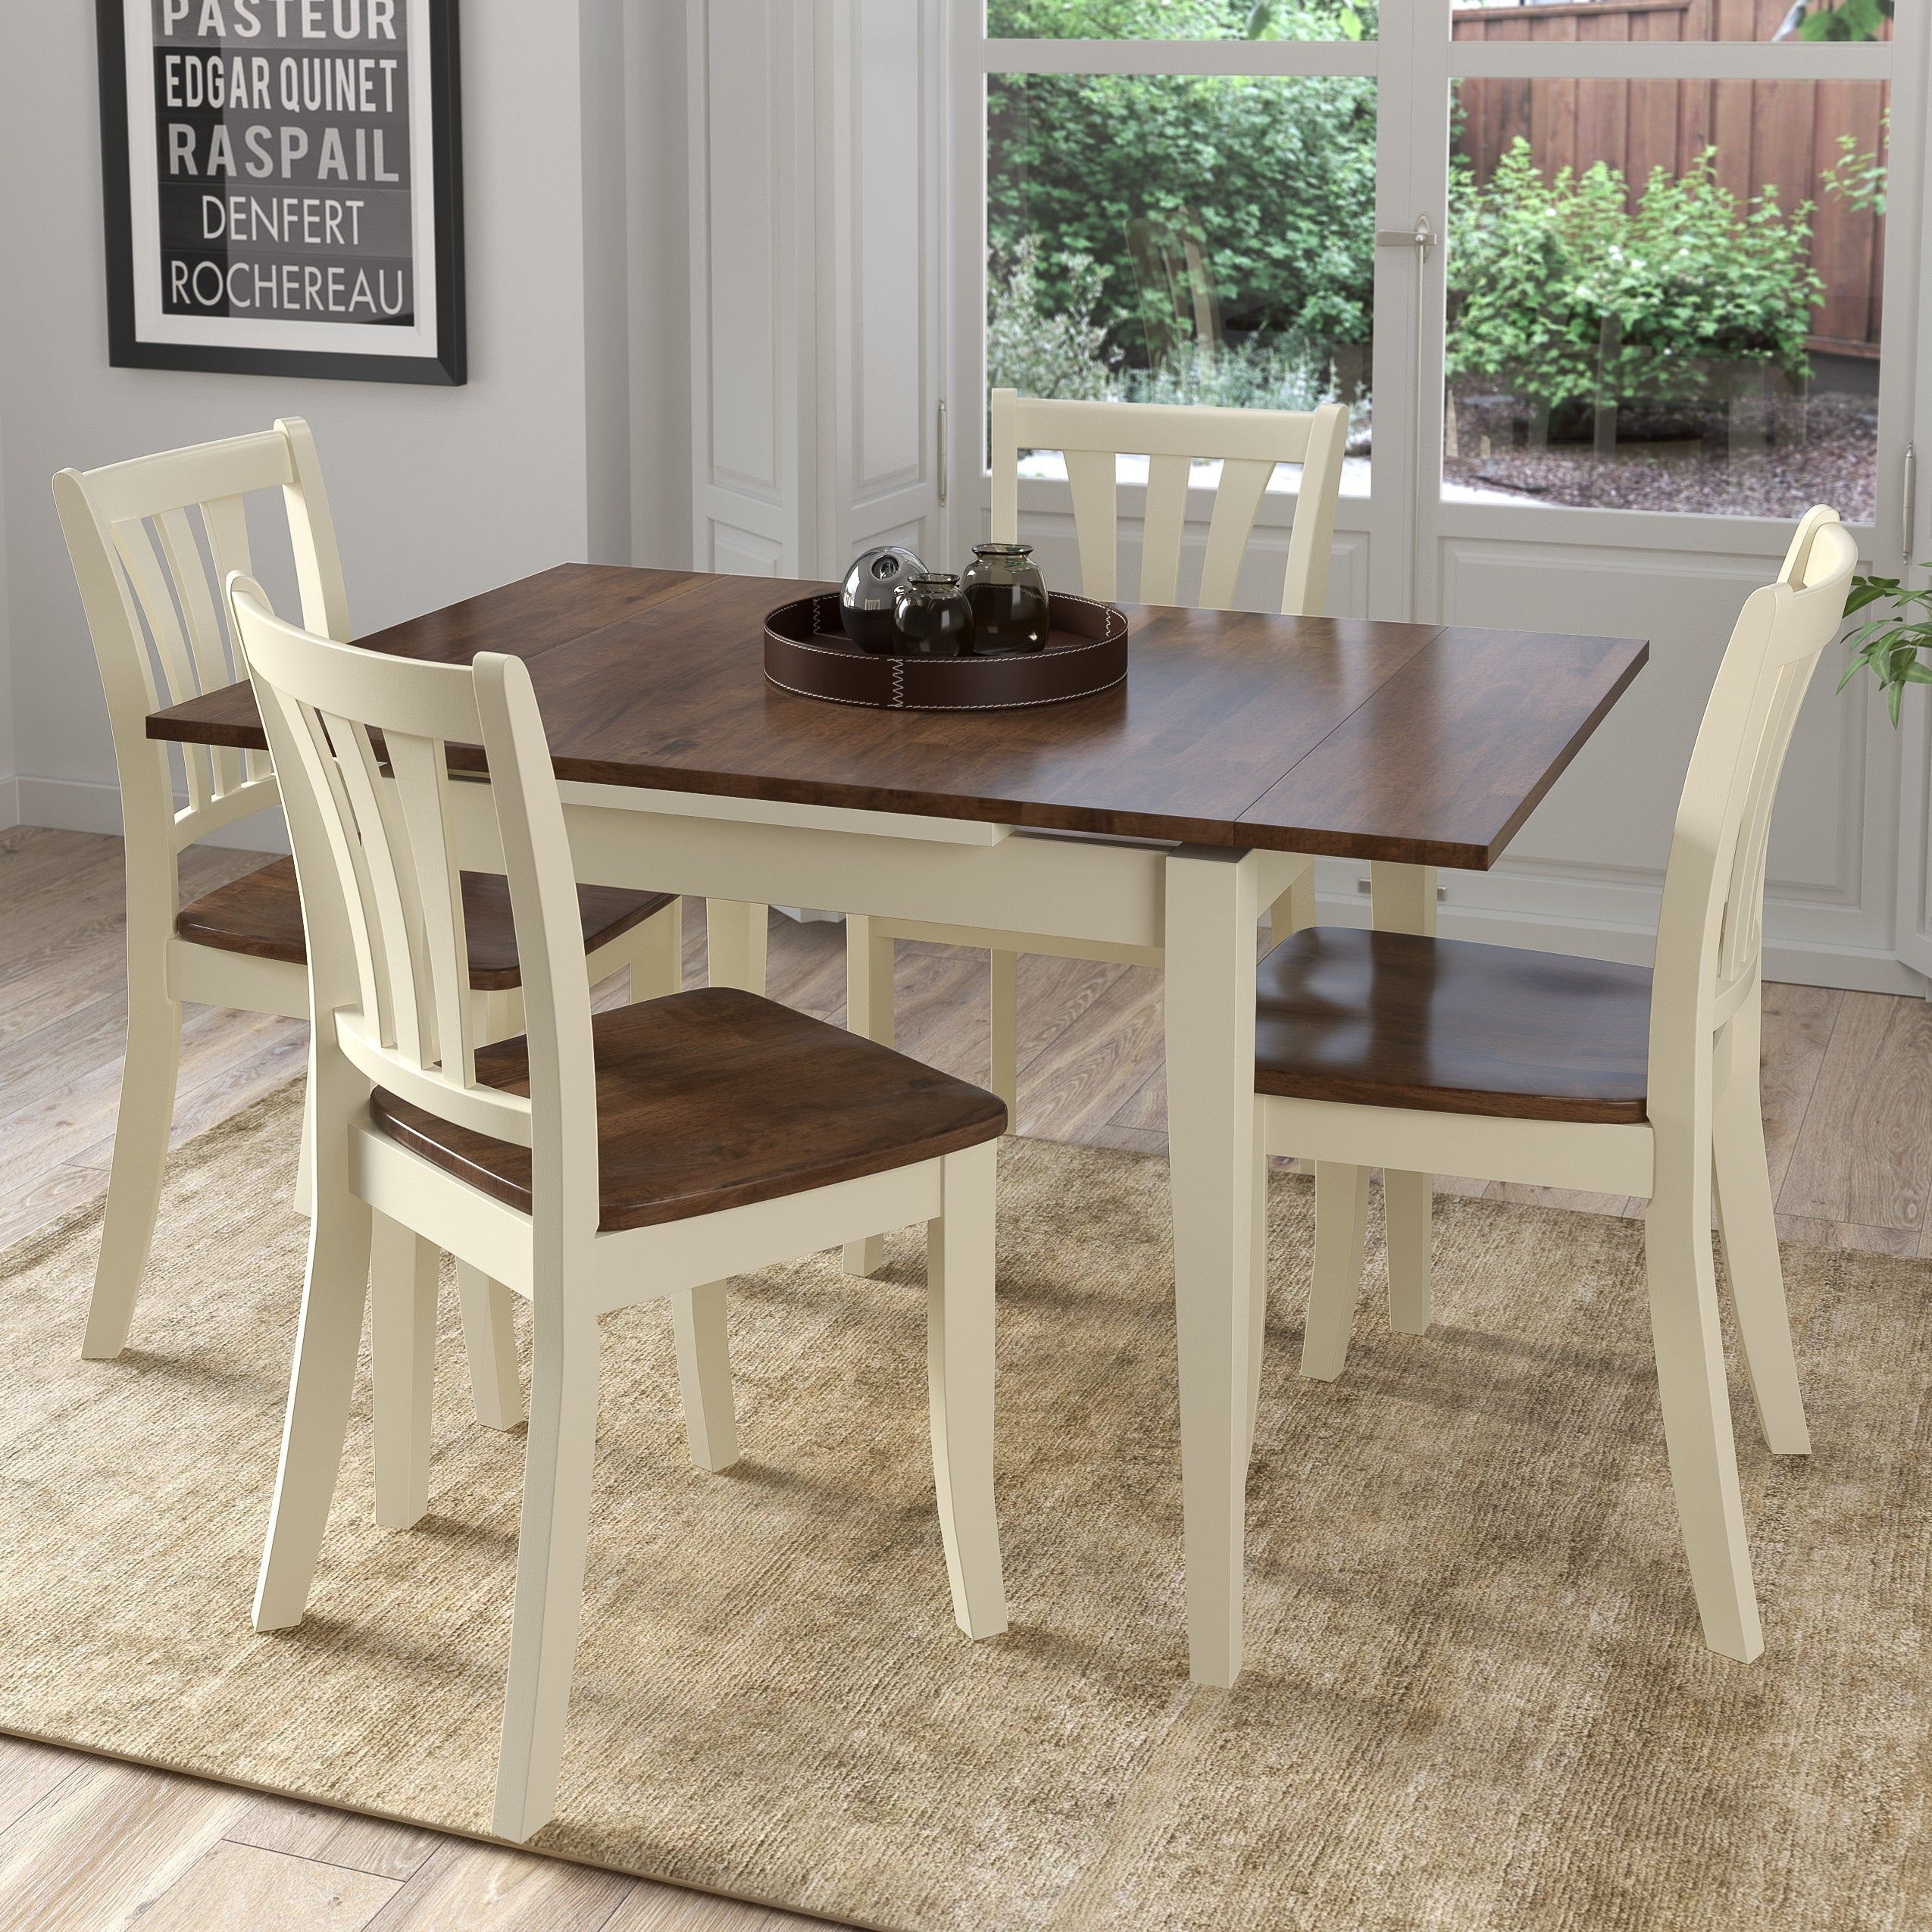 Corliving Dillon Walnut And Cream Rubberwood 5 Piece Extendable Dining Set In Most Recent Menlo Reclaimed Wood Extending Dining Tables (View 21 of 25)